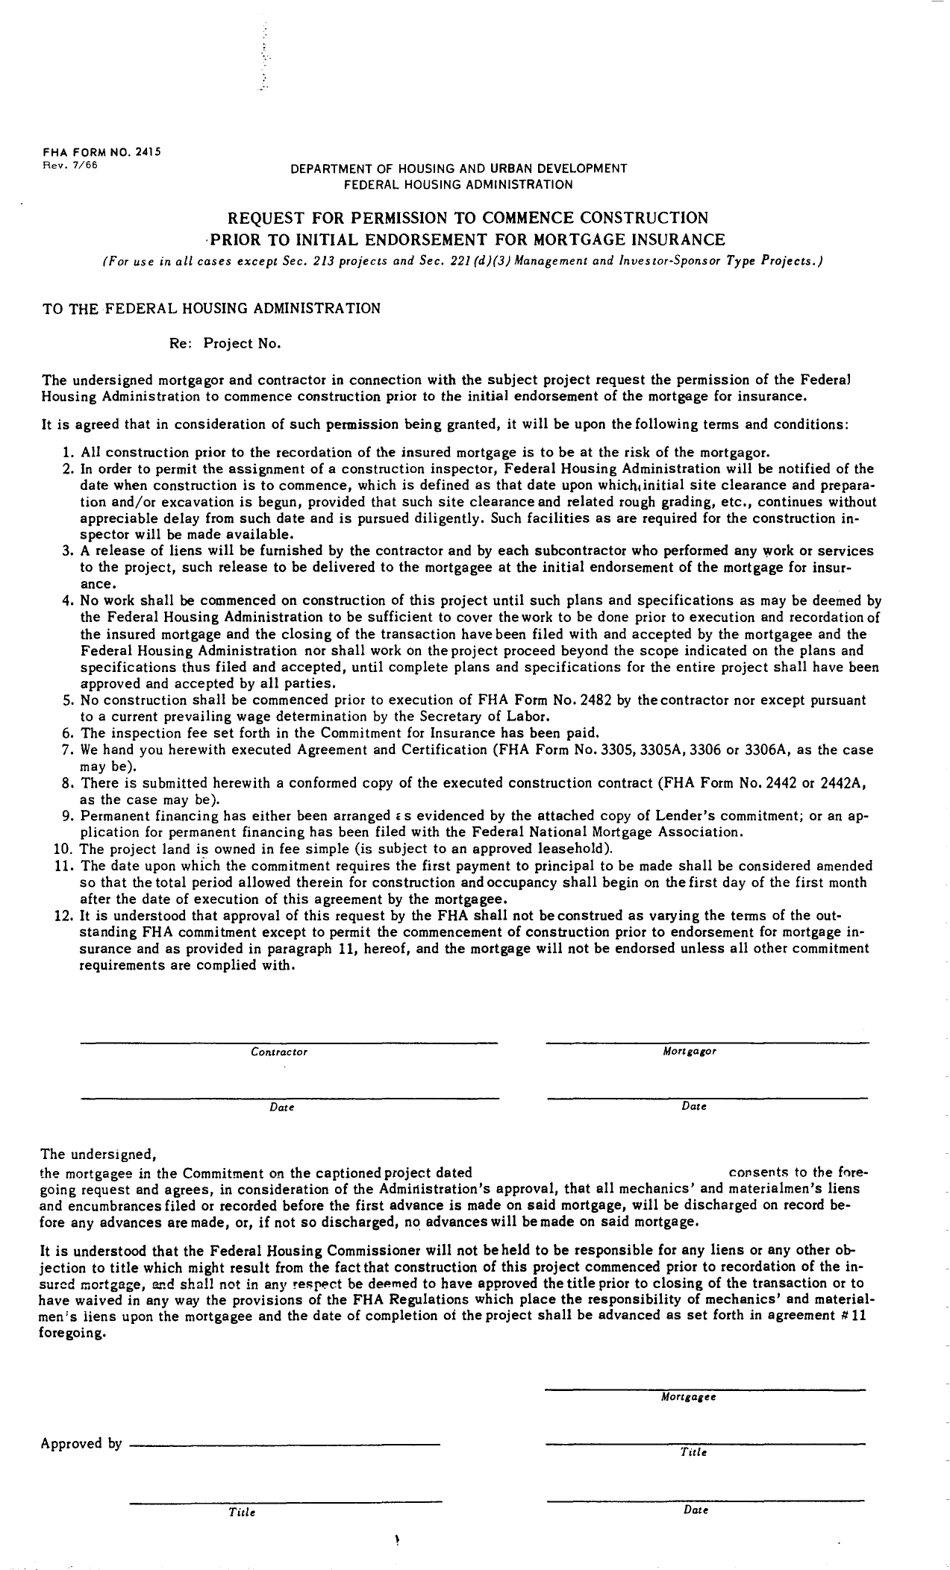 Form FHA-2415 Request for Permission to Commence Construction Prior to Initial Endorsement for Mortgage Insurance, Page 1